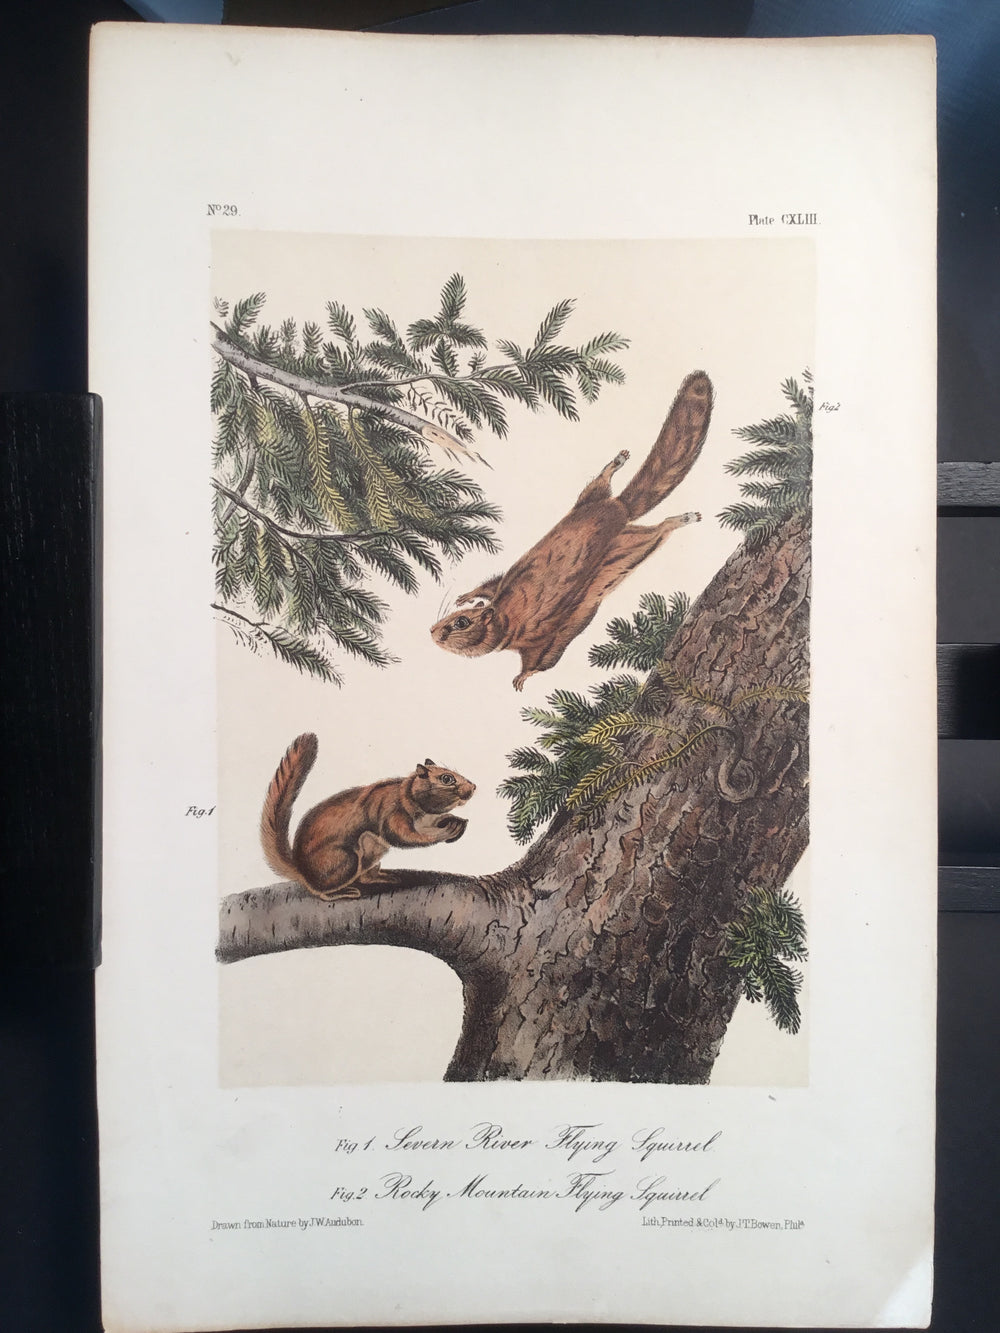 Lord-Hopkins Collection - Flying Squirrel